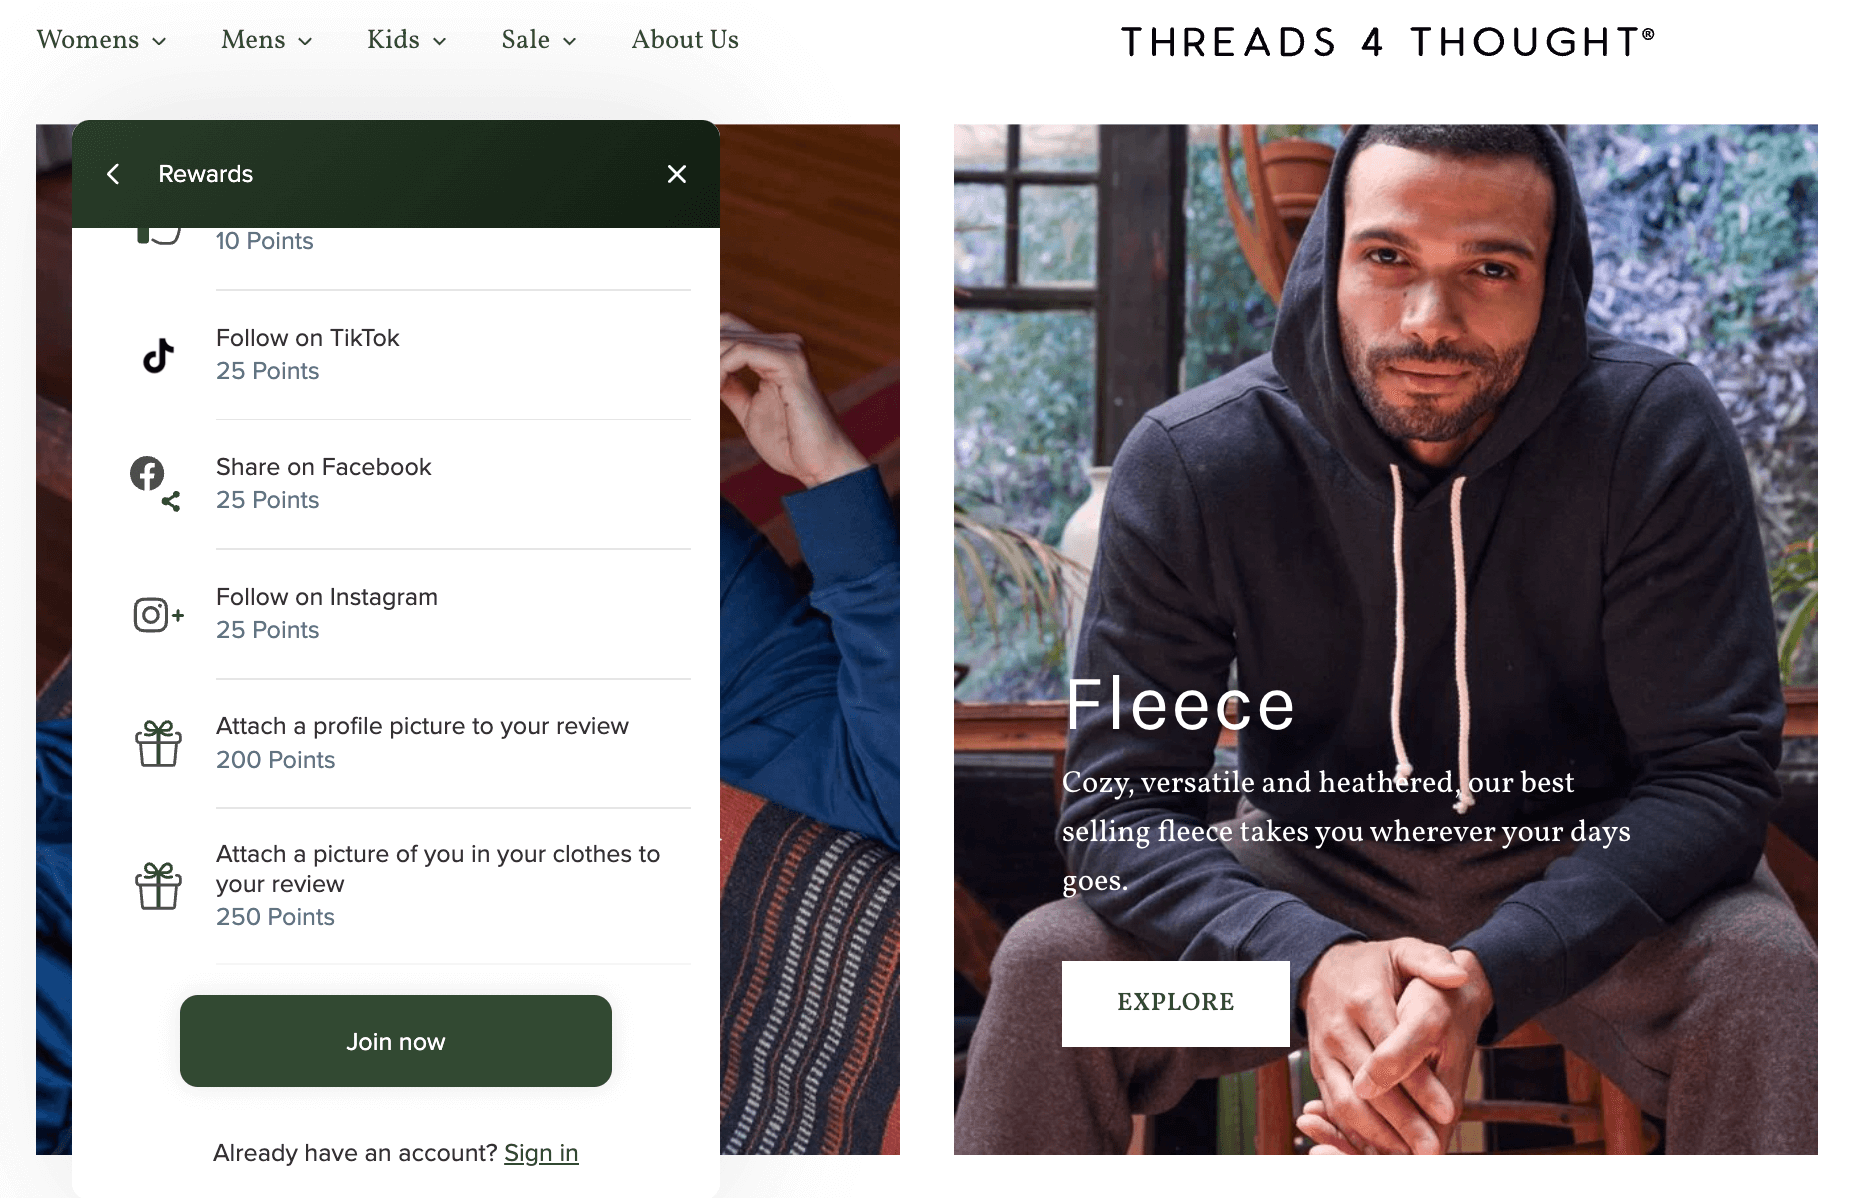 screenshot of threads 4 thought apparel brand and loyalty program